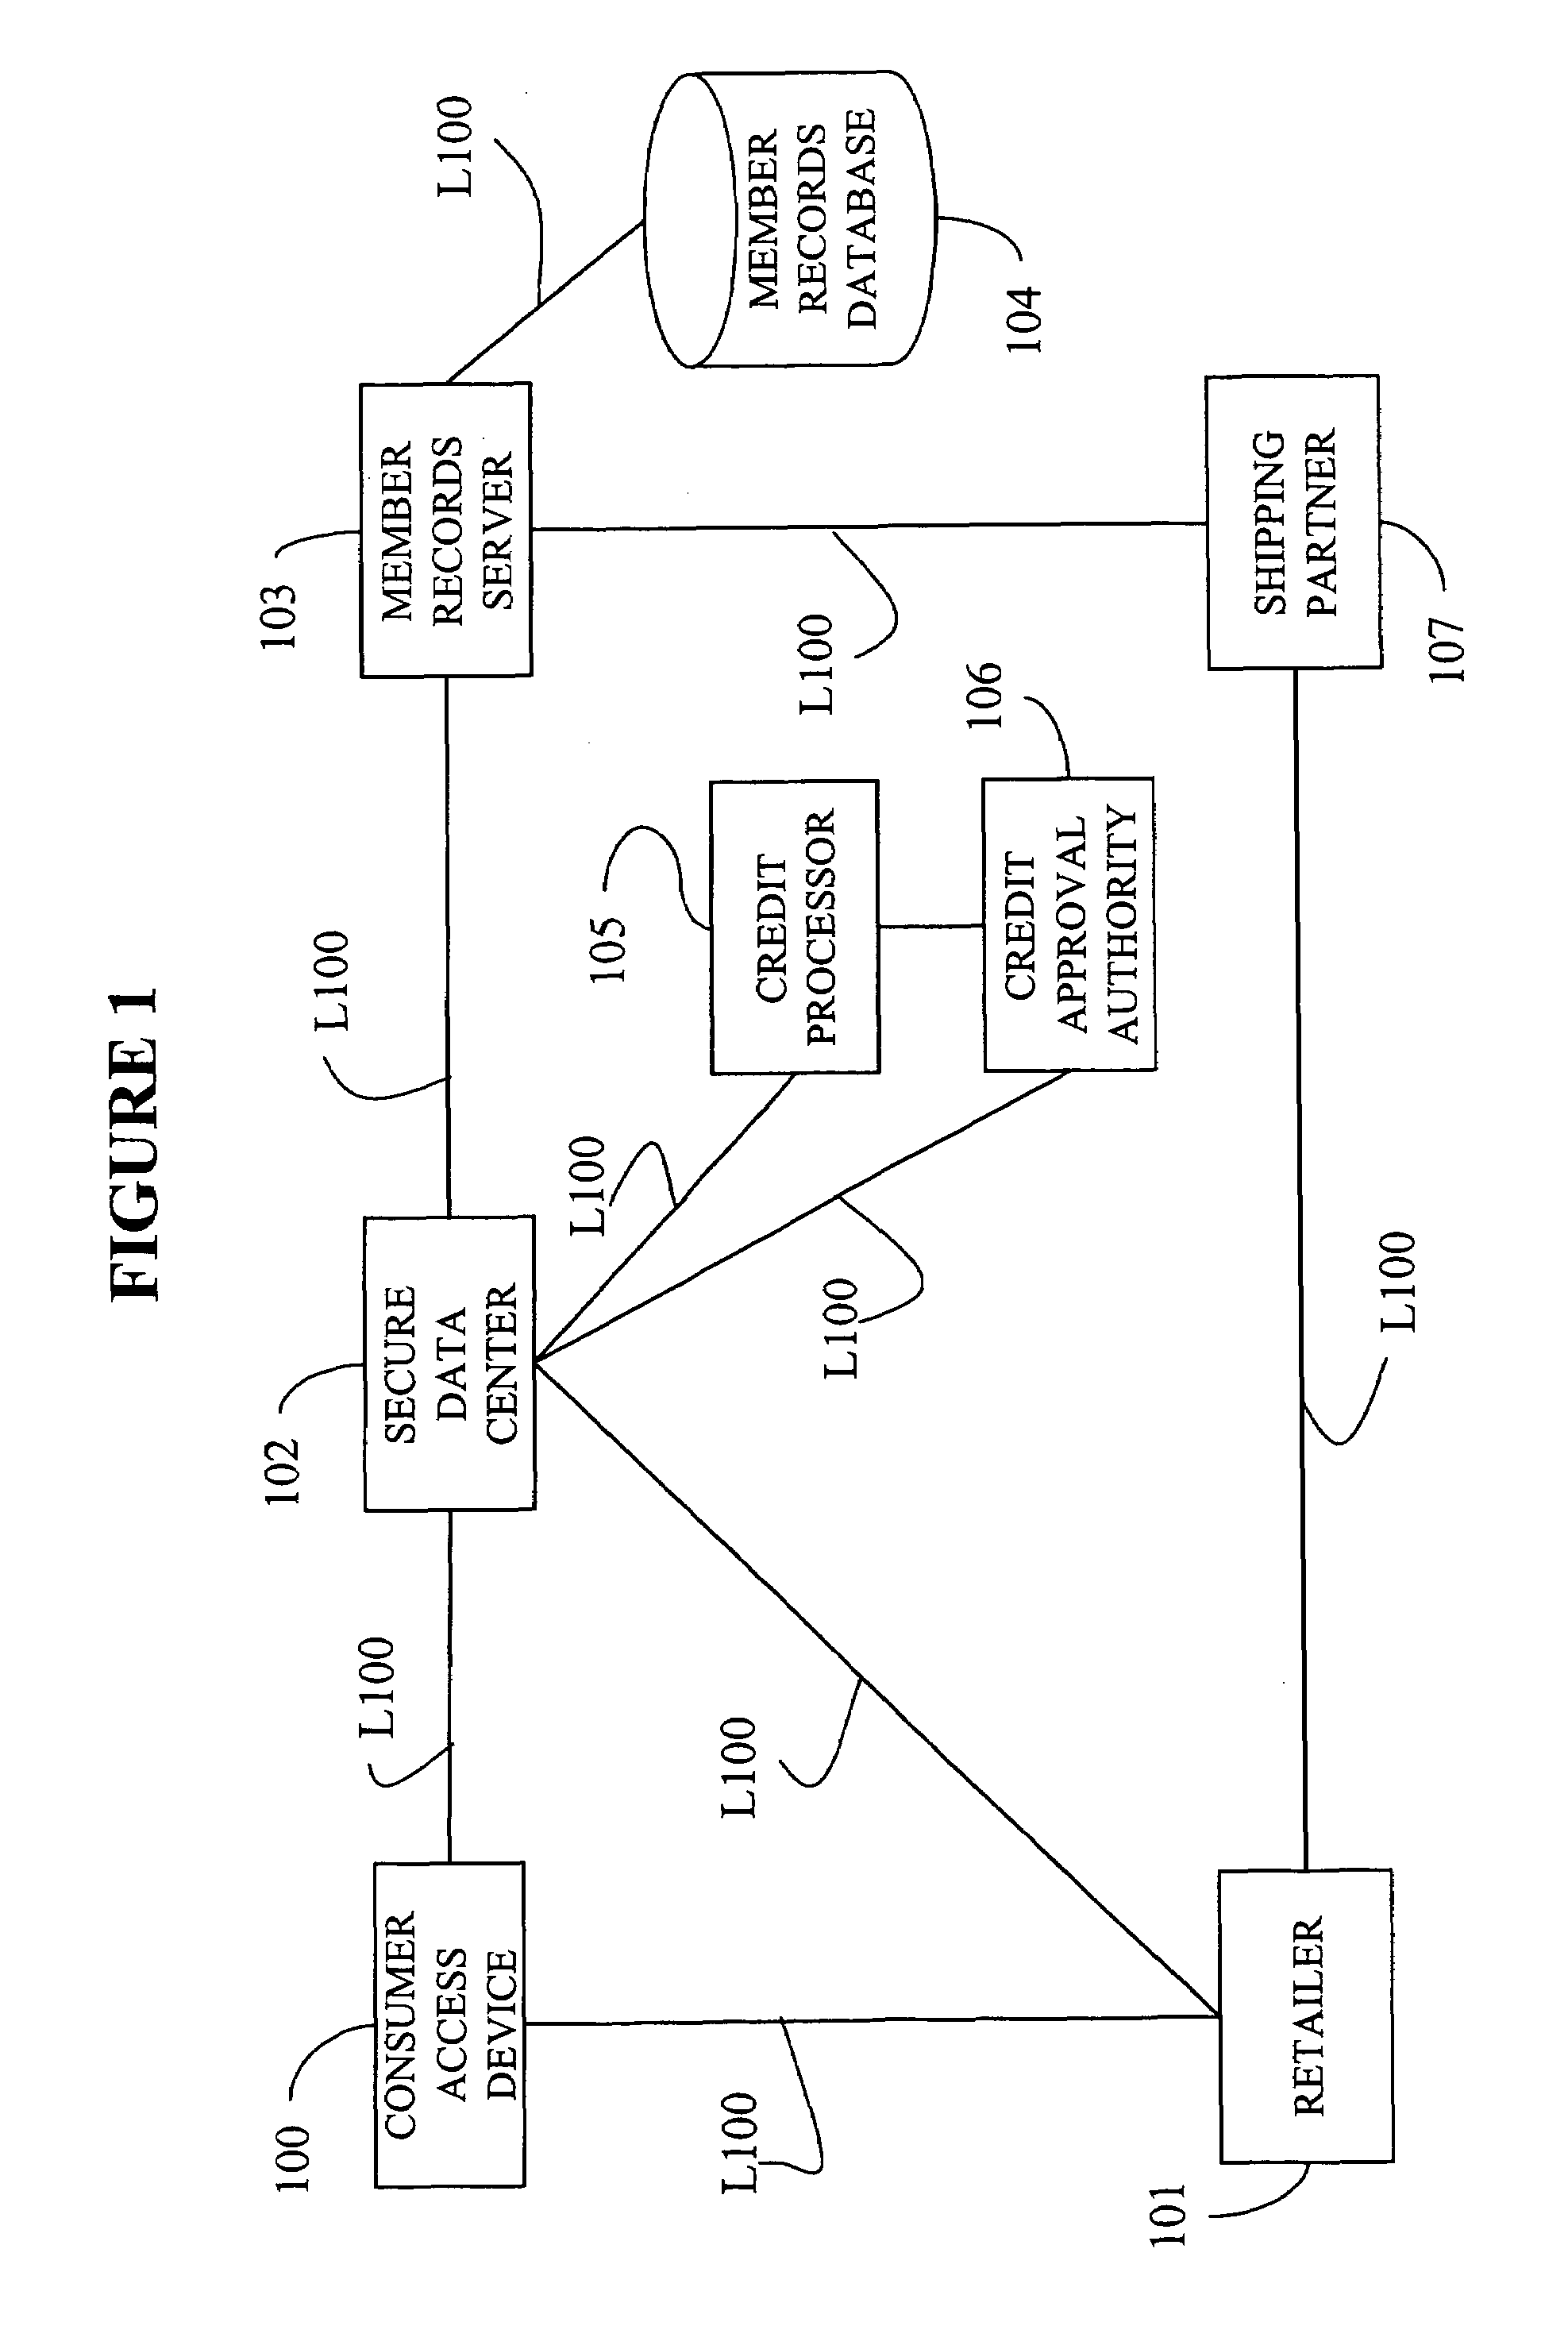 System, method, and computer program product for maintaining consumer privacy and security in electronic commerce transactions